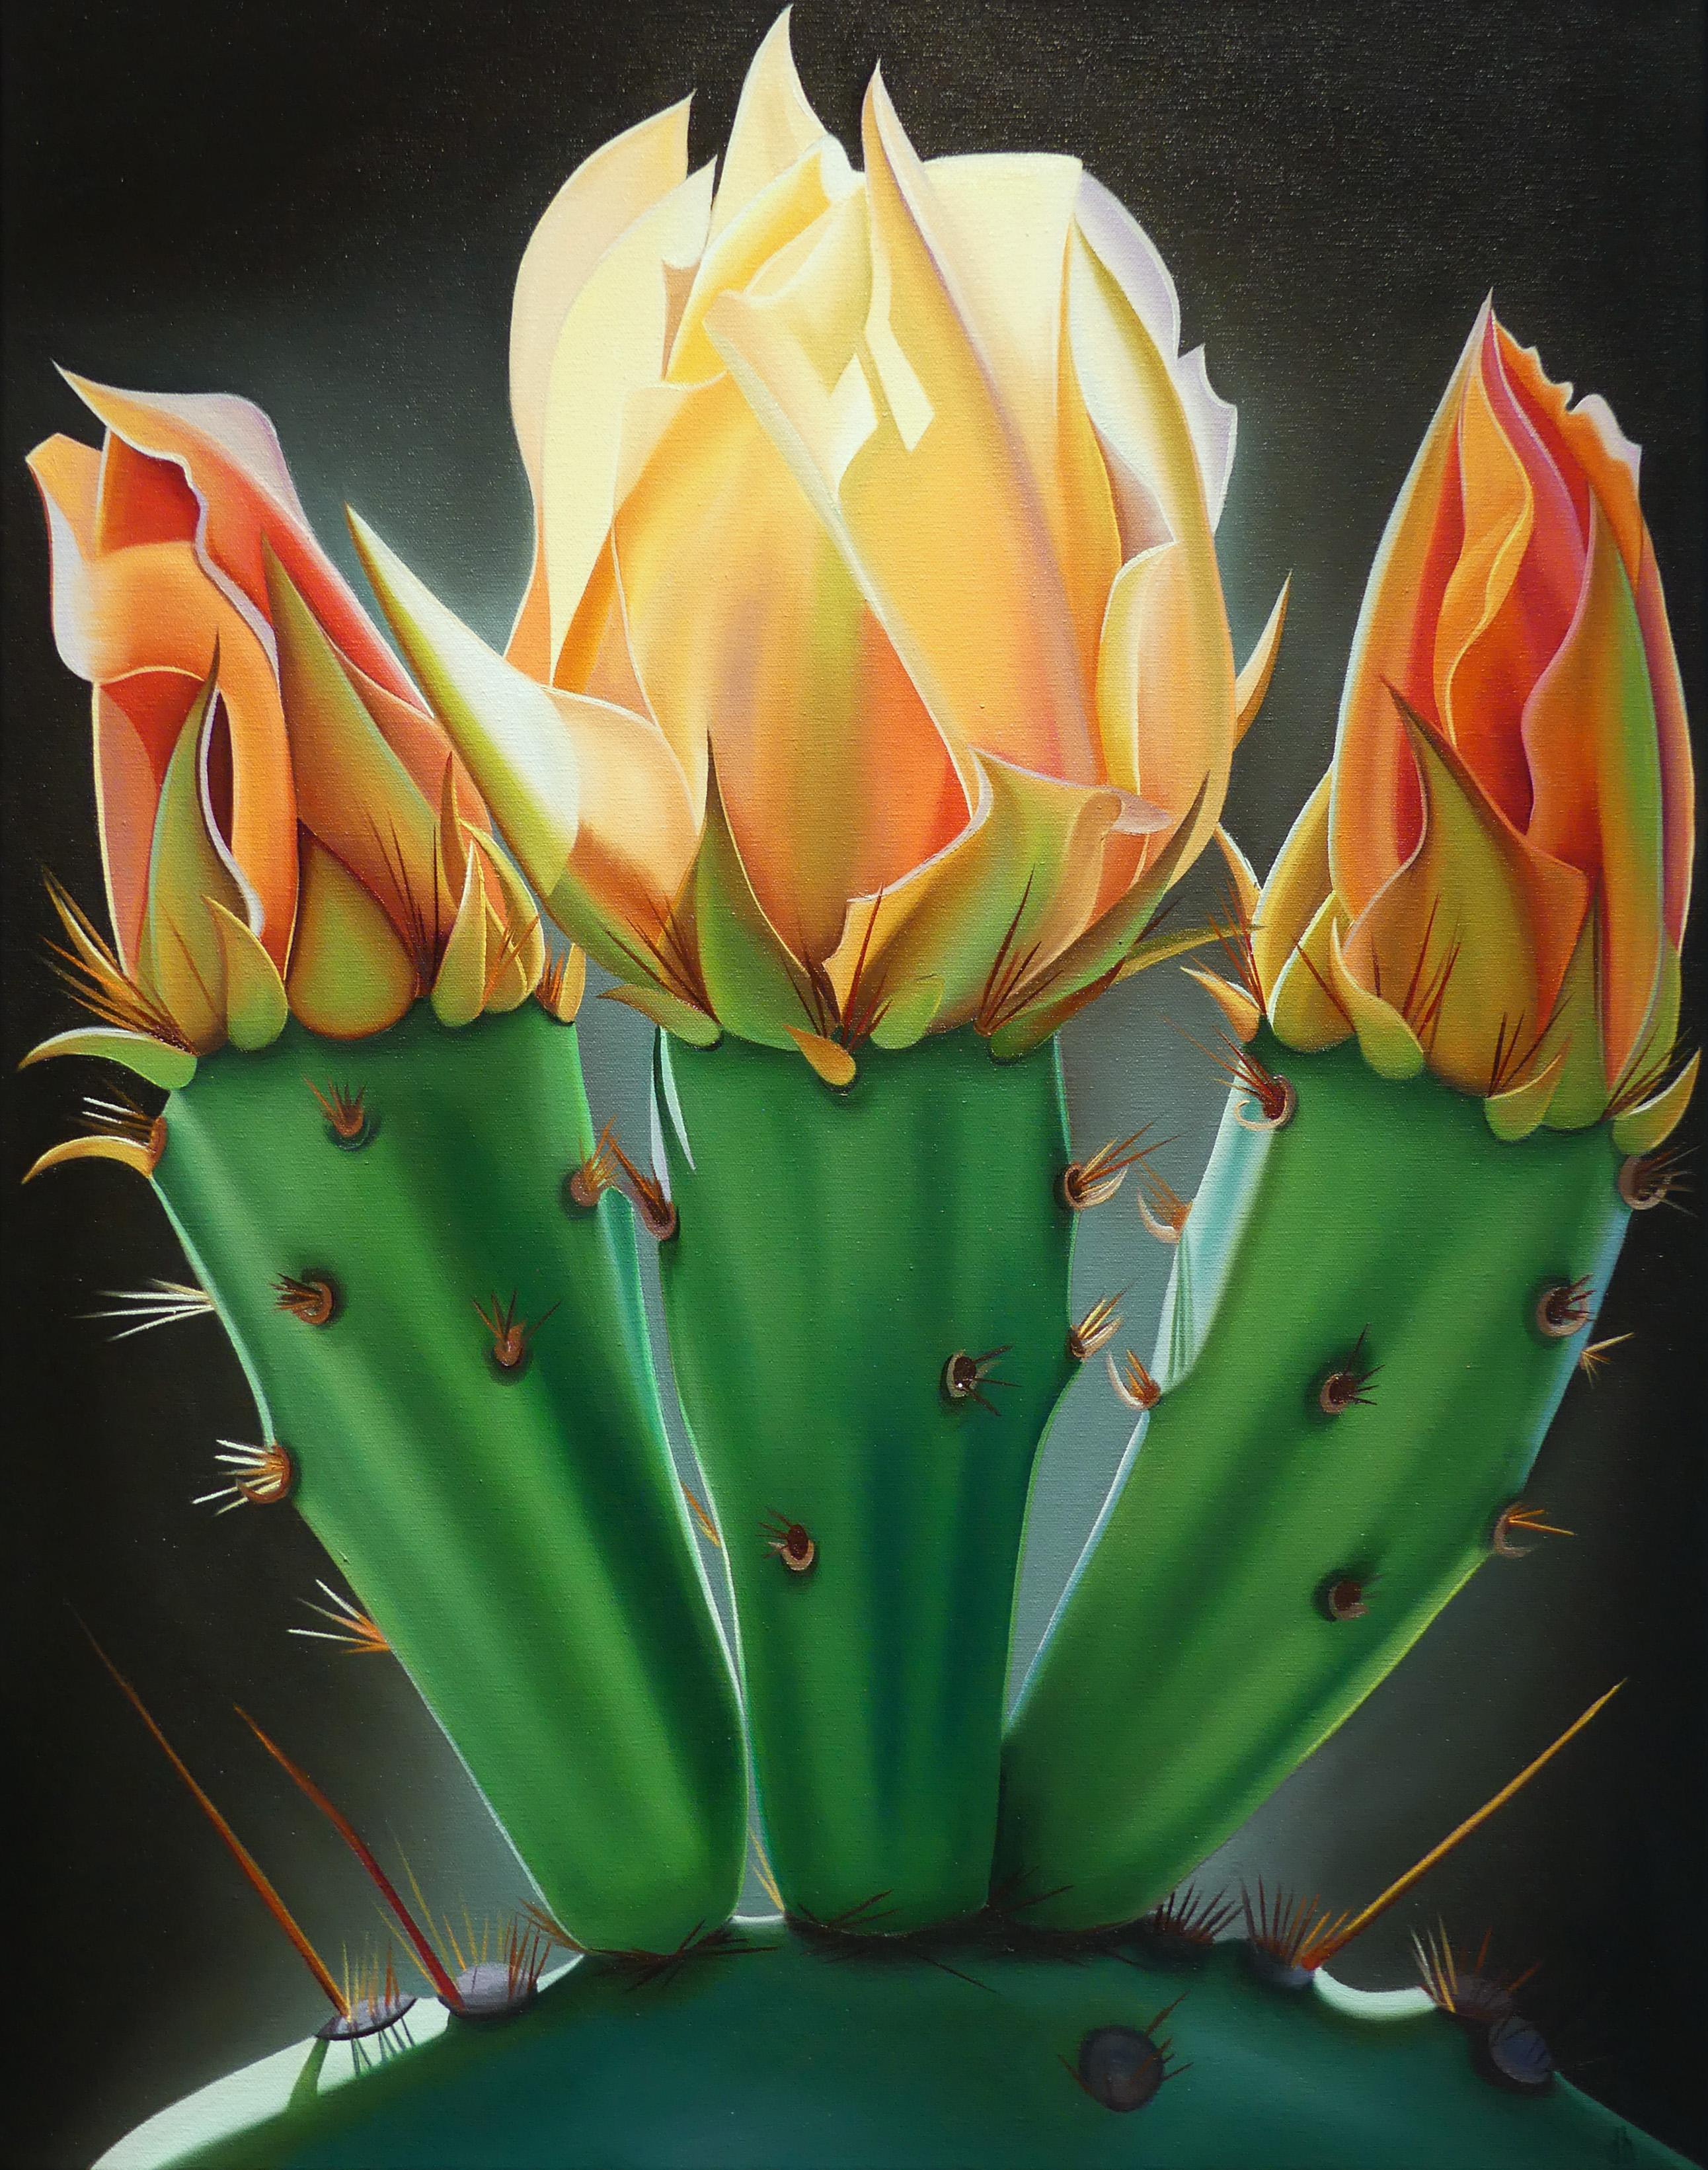 Dyana Hesson Landscape Painting - "Trifecta, Prickly Pear Bloom and Buds"